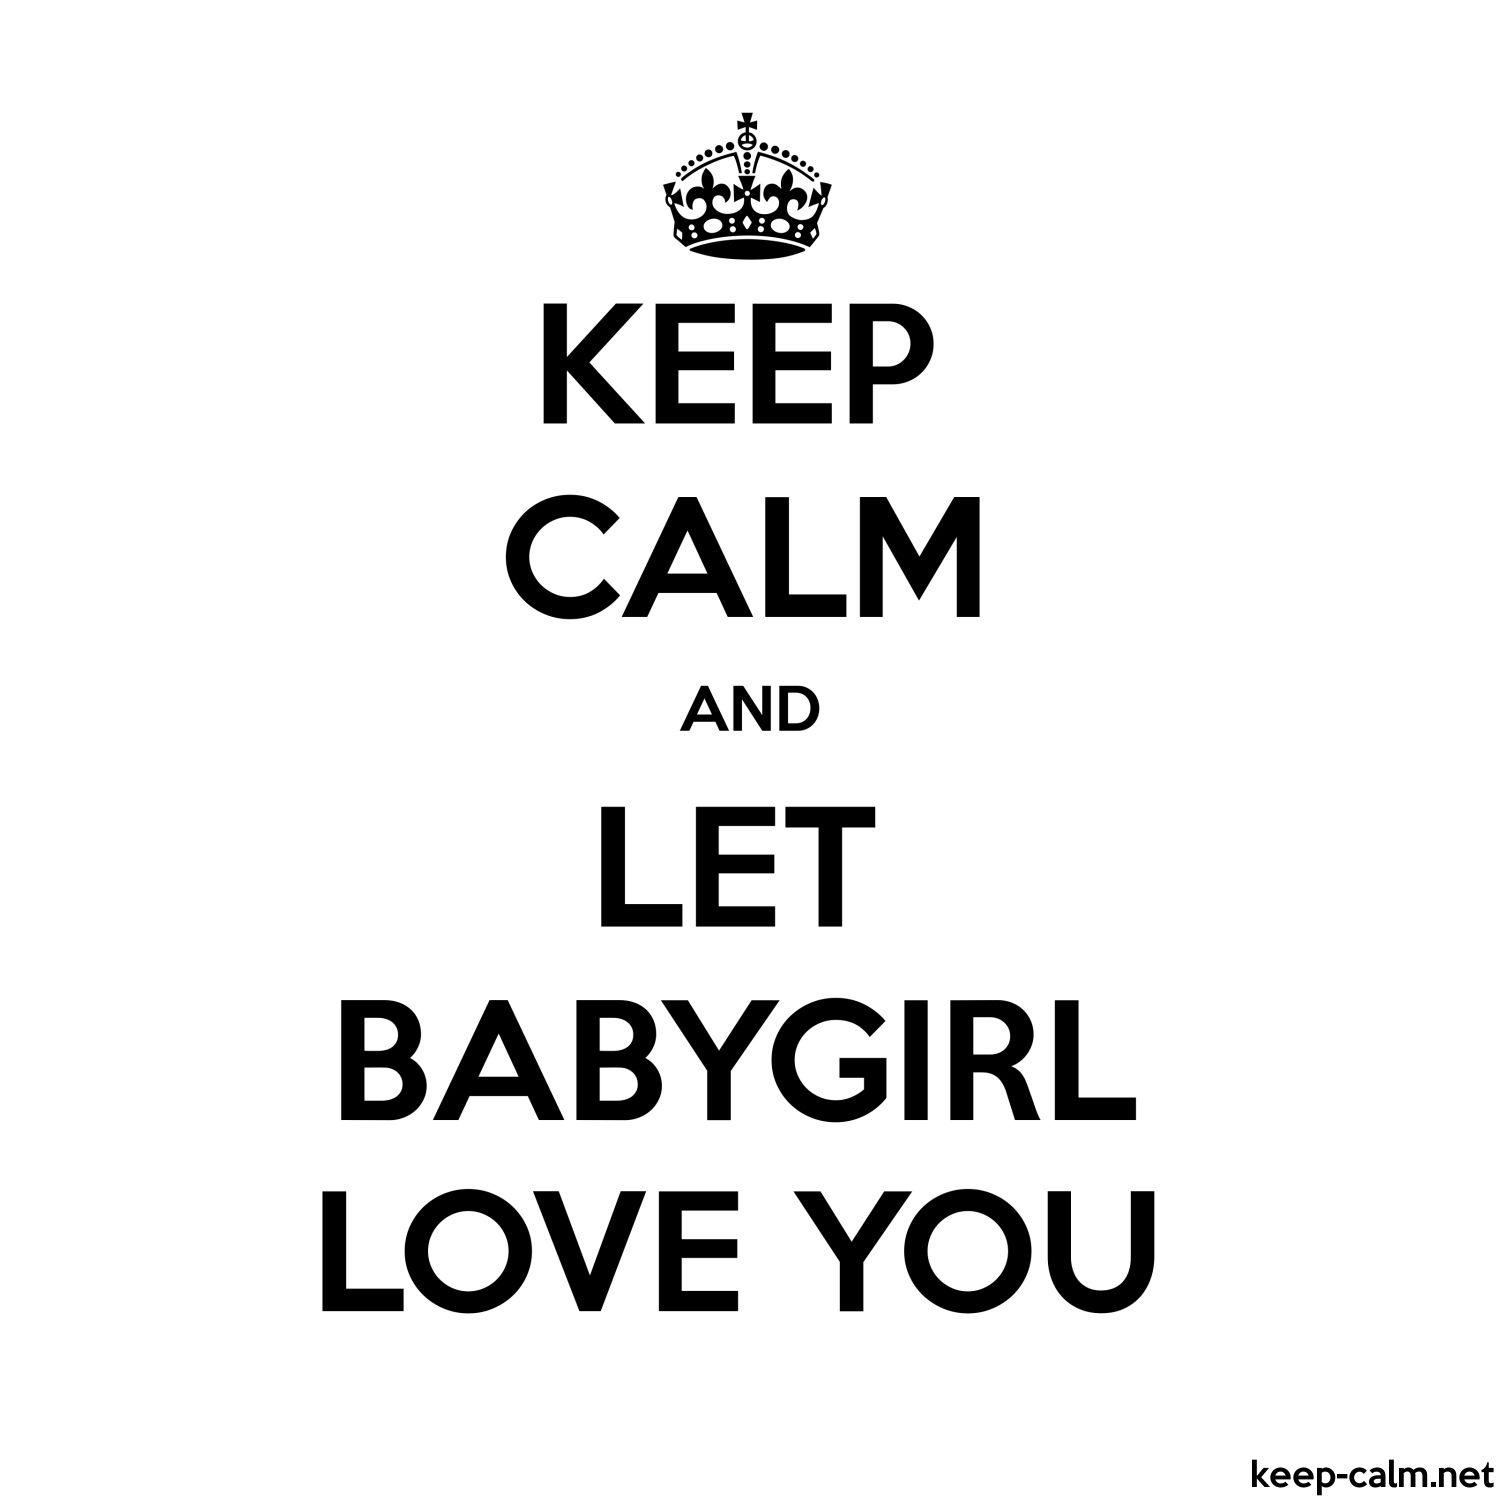 KEEP CALM AND LET BABYGIRL LOVE YOU